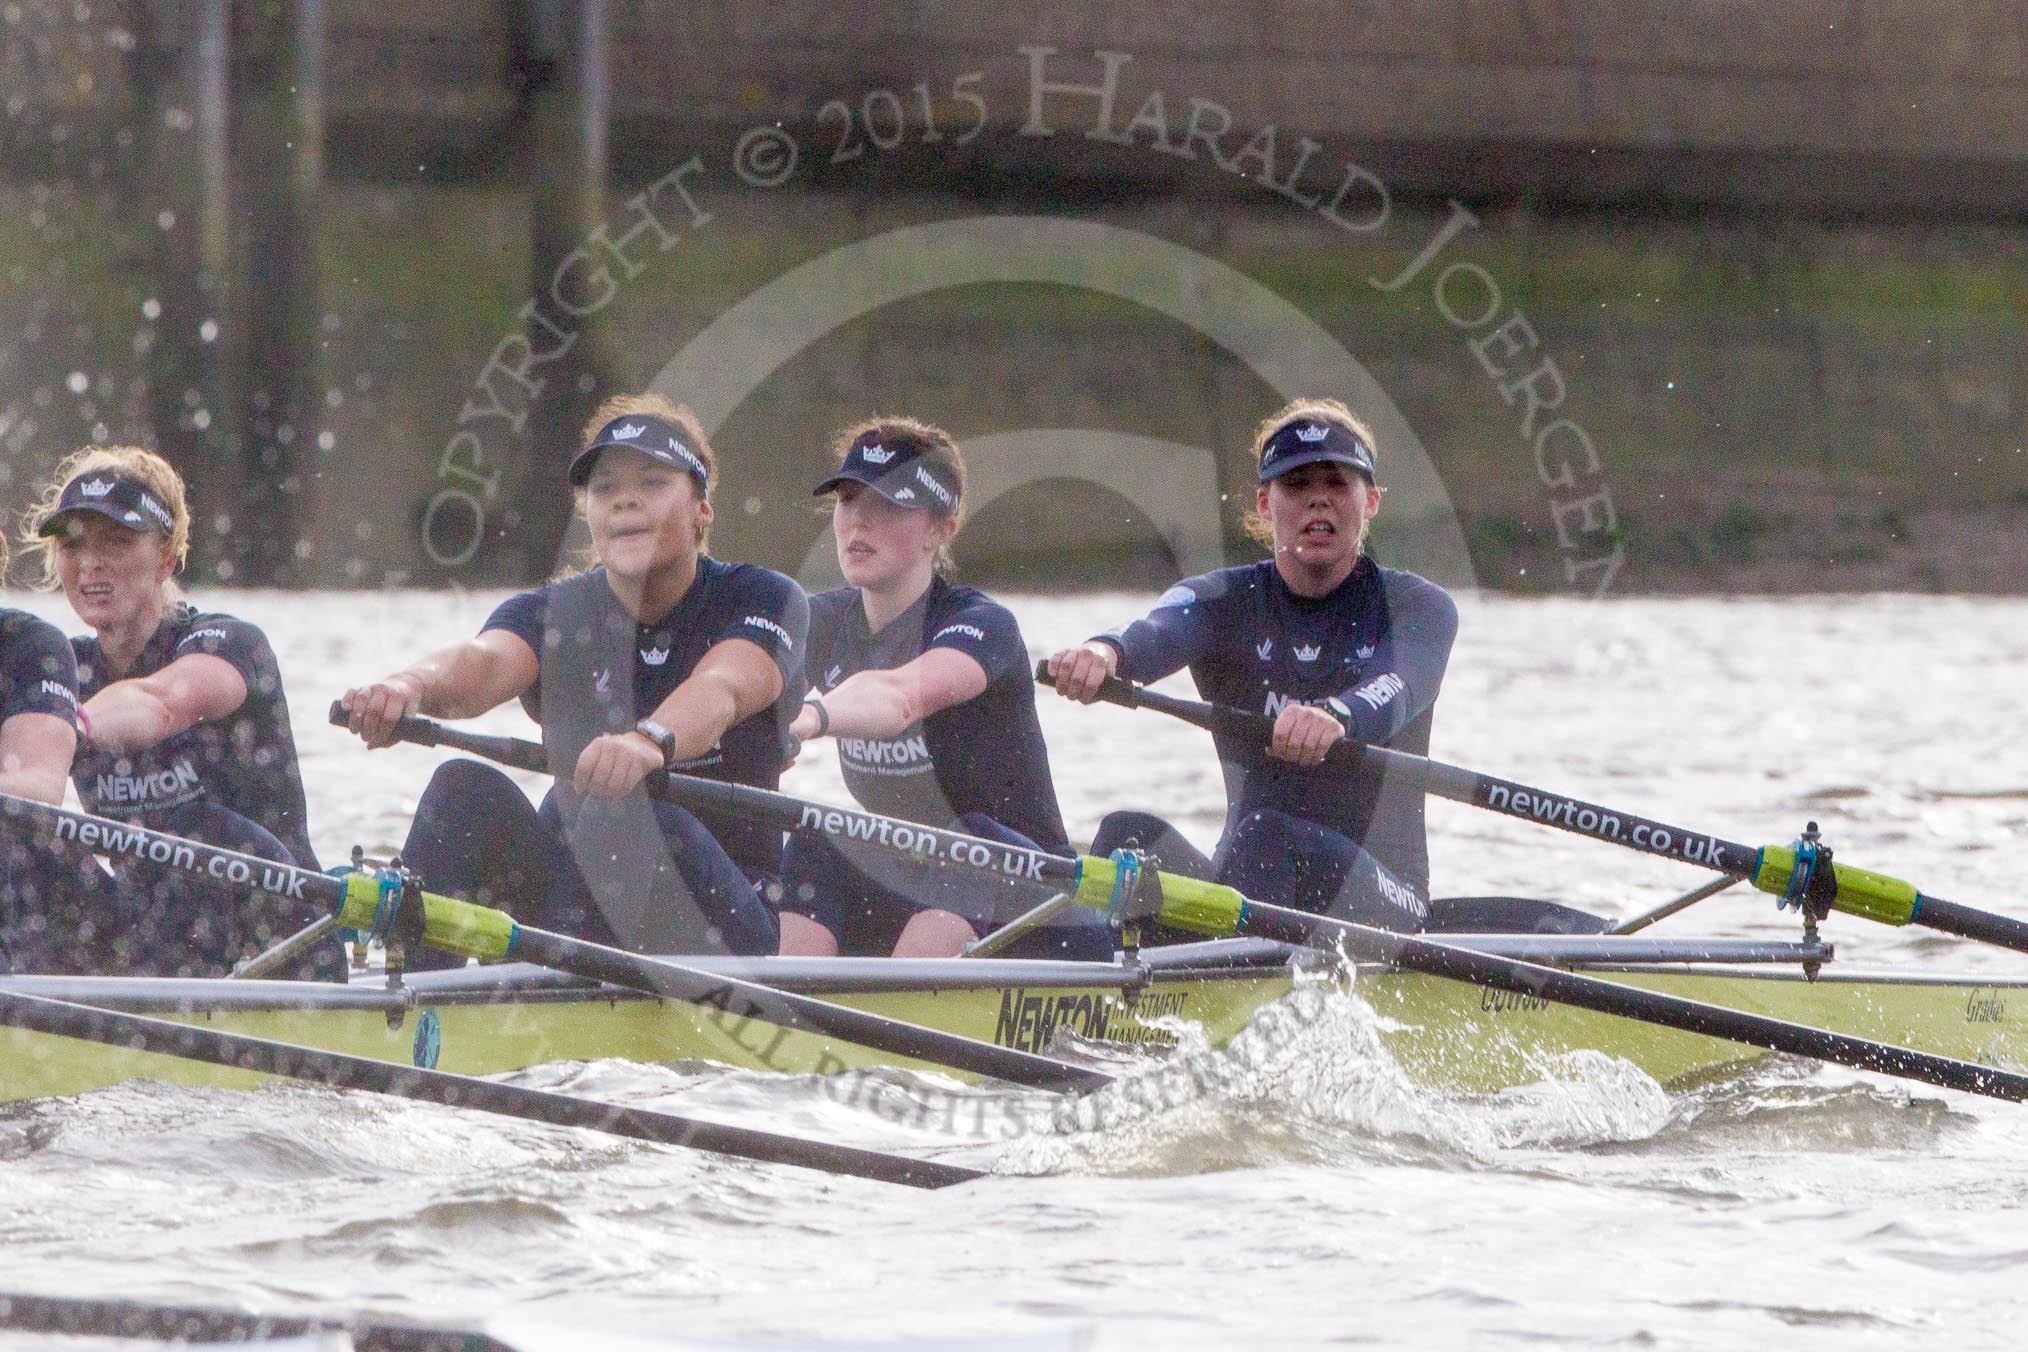 The Boat Race season 2016 - Women's Boat Race Trial Eights (OUWBC, Oxford): "Charybdis", here 4-Emma Spruce, 3-Lara Pysden, 2-Christina Fleischer, bow-Georgie Daniell.
River Thames between Putney Bridge and Mortlake,
London SW15,

United Kingdom,
on 10 December 2015 at 12:33, image #280